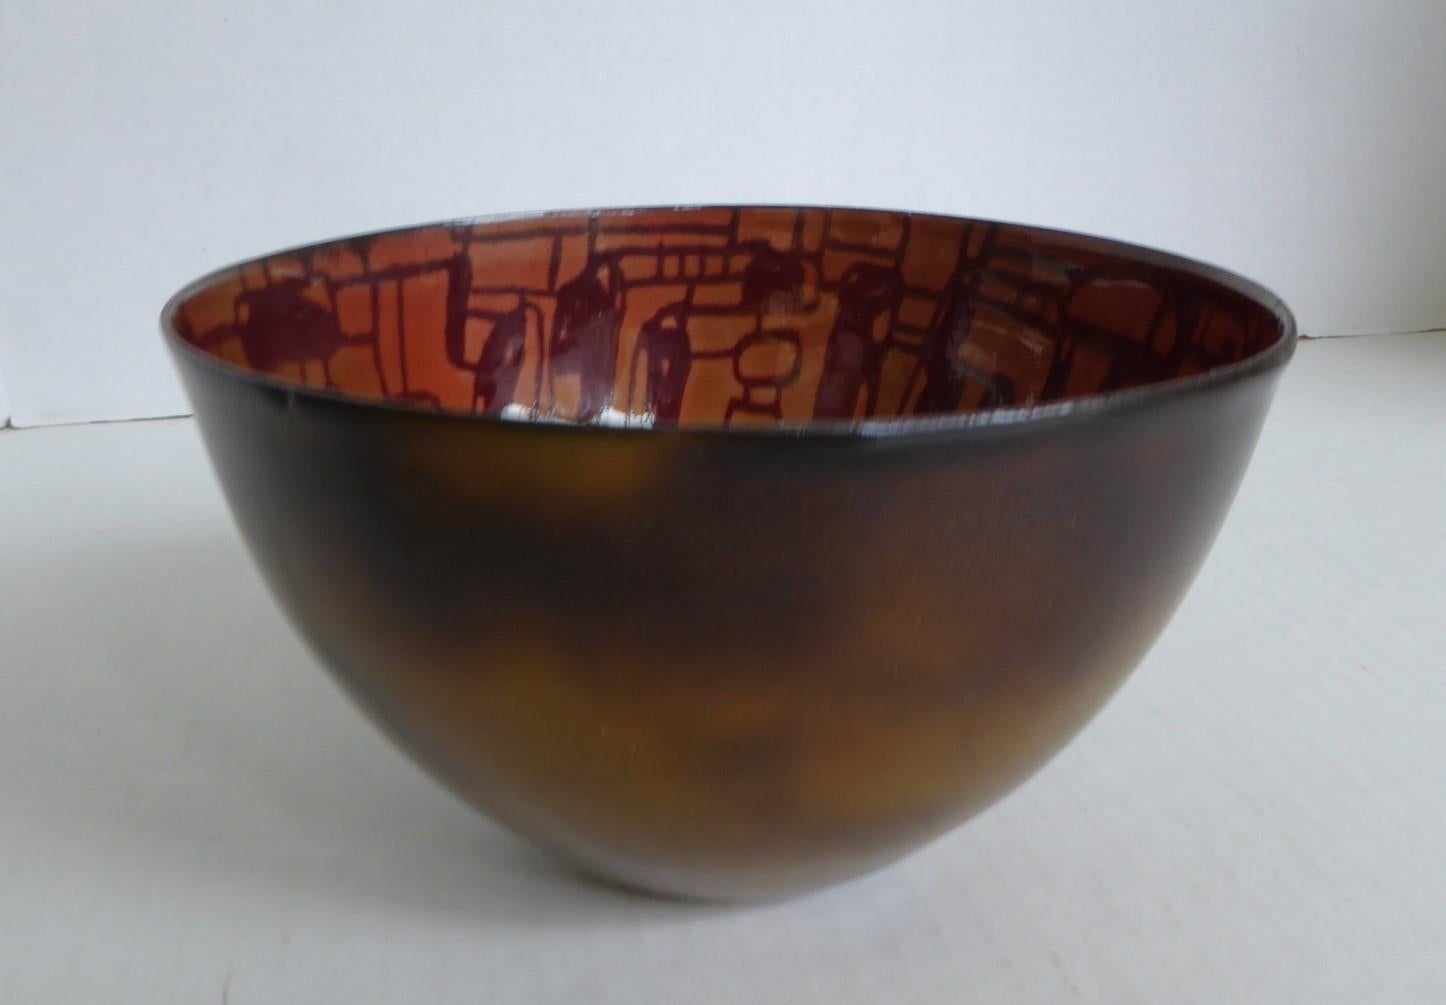 Unique and elegant, Organic Modern Copper Enamel Bowl by Donna R. Read.  Ms. Read was probably a Professor of Art at the Texas Technological College in Lubbock, TX. and this is one of her works in copper enameling.   This bowl shows the proficiency